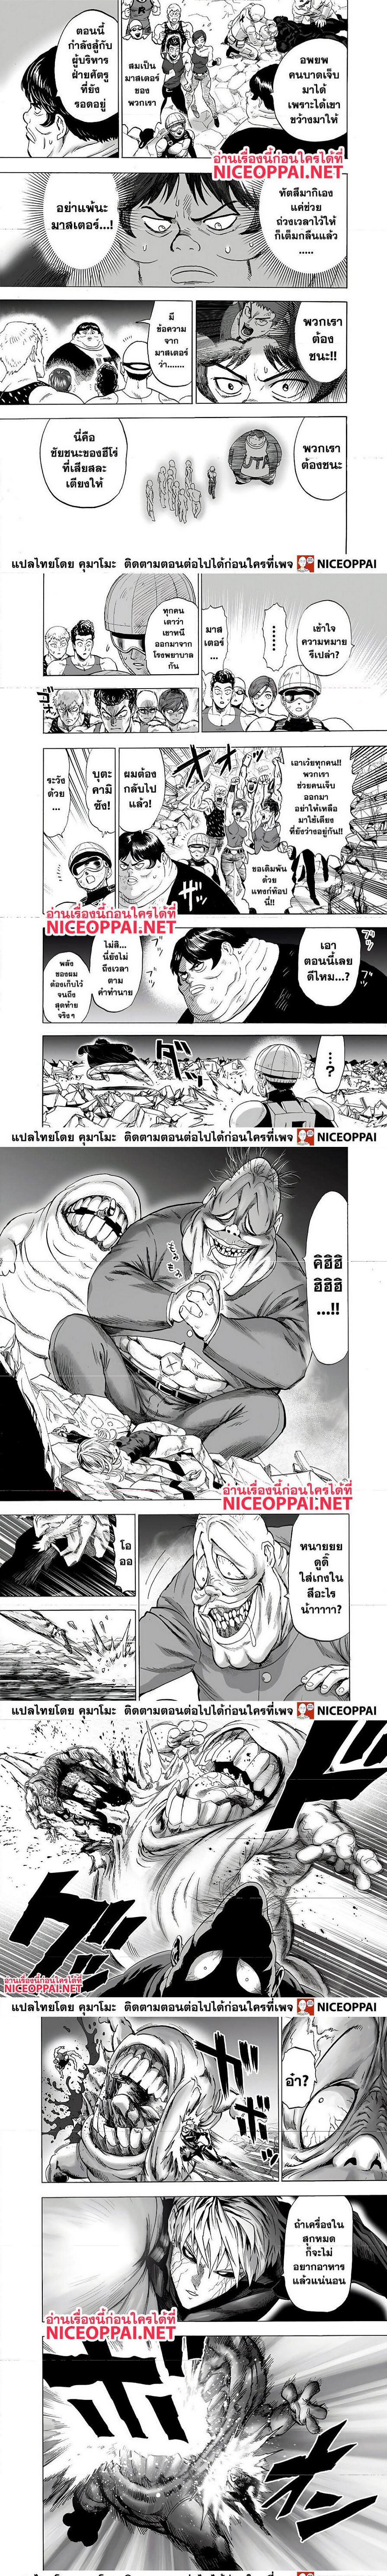 One Punch Man144.2 (2)